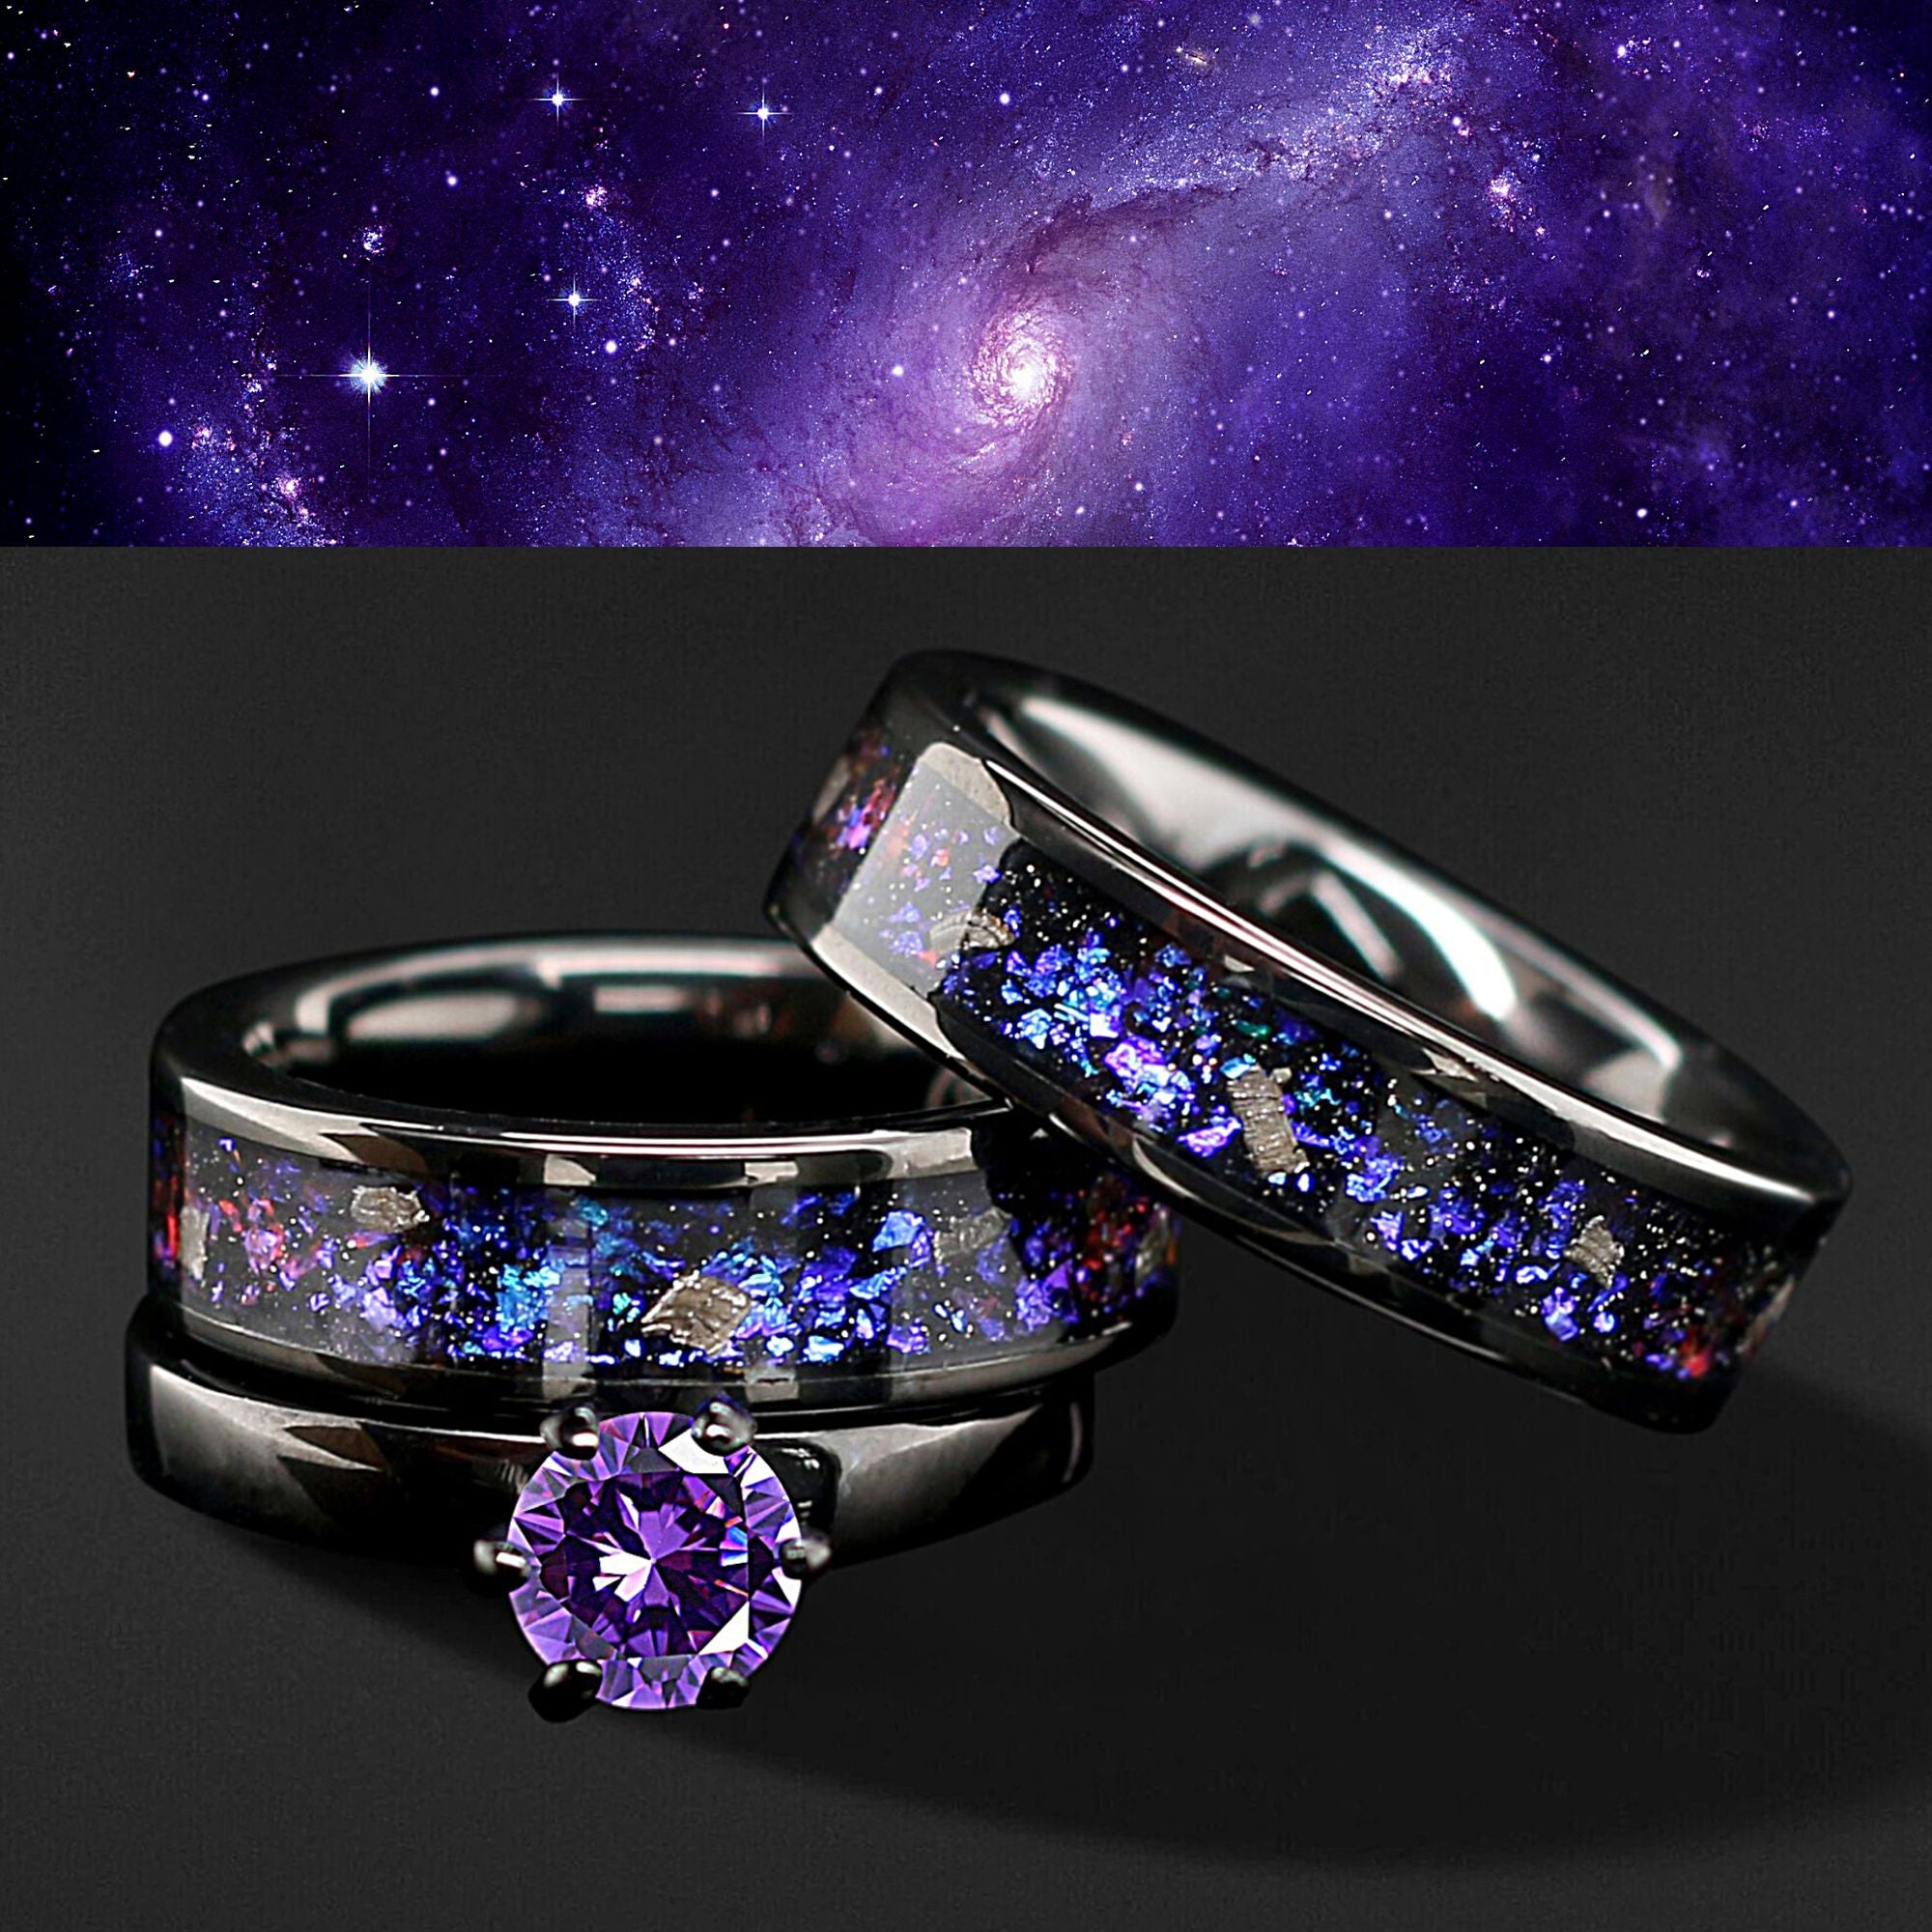 NEBULA Unique Engagement Wedding Rings Set | Natural Meteorite, Opal & Amethyst | Tungsten Wedding Bands for Him & Her